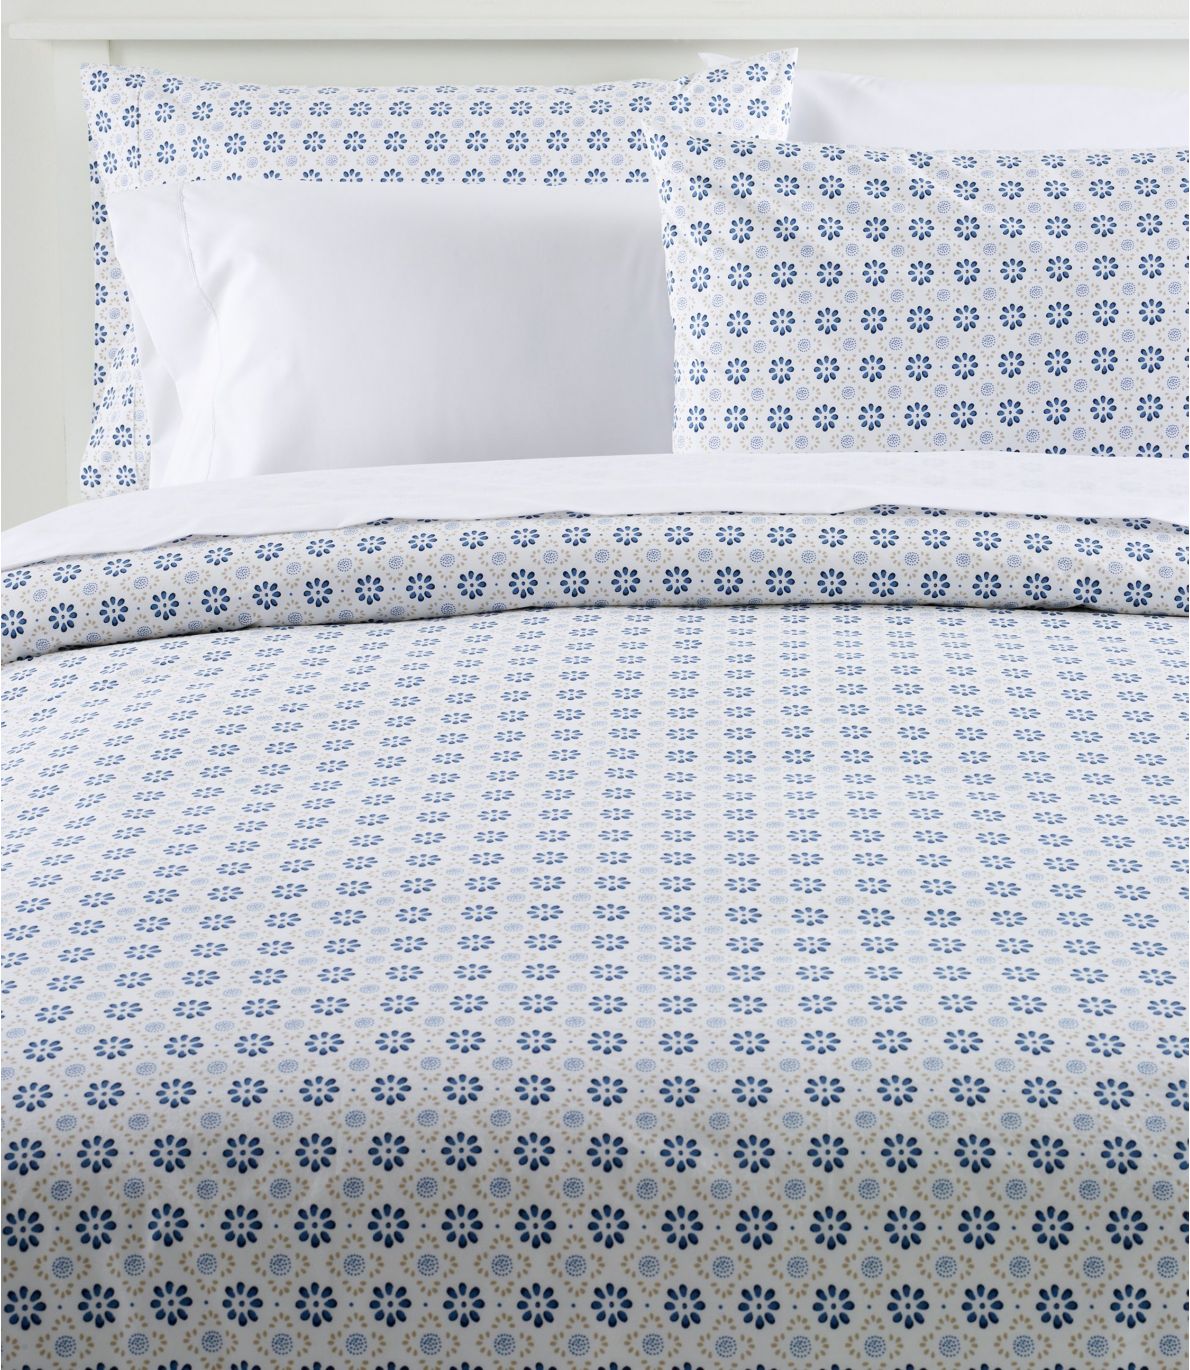 Sunwashed Percale Comforter Cover, Print